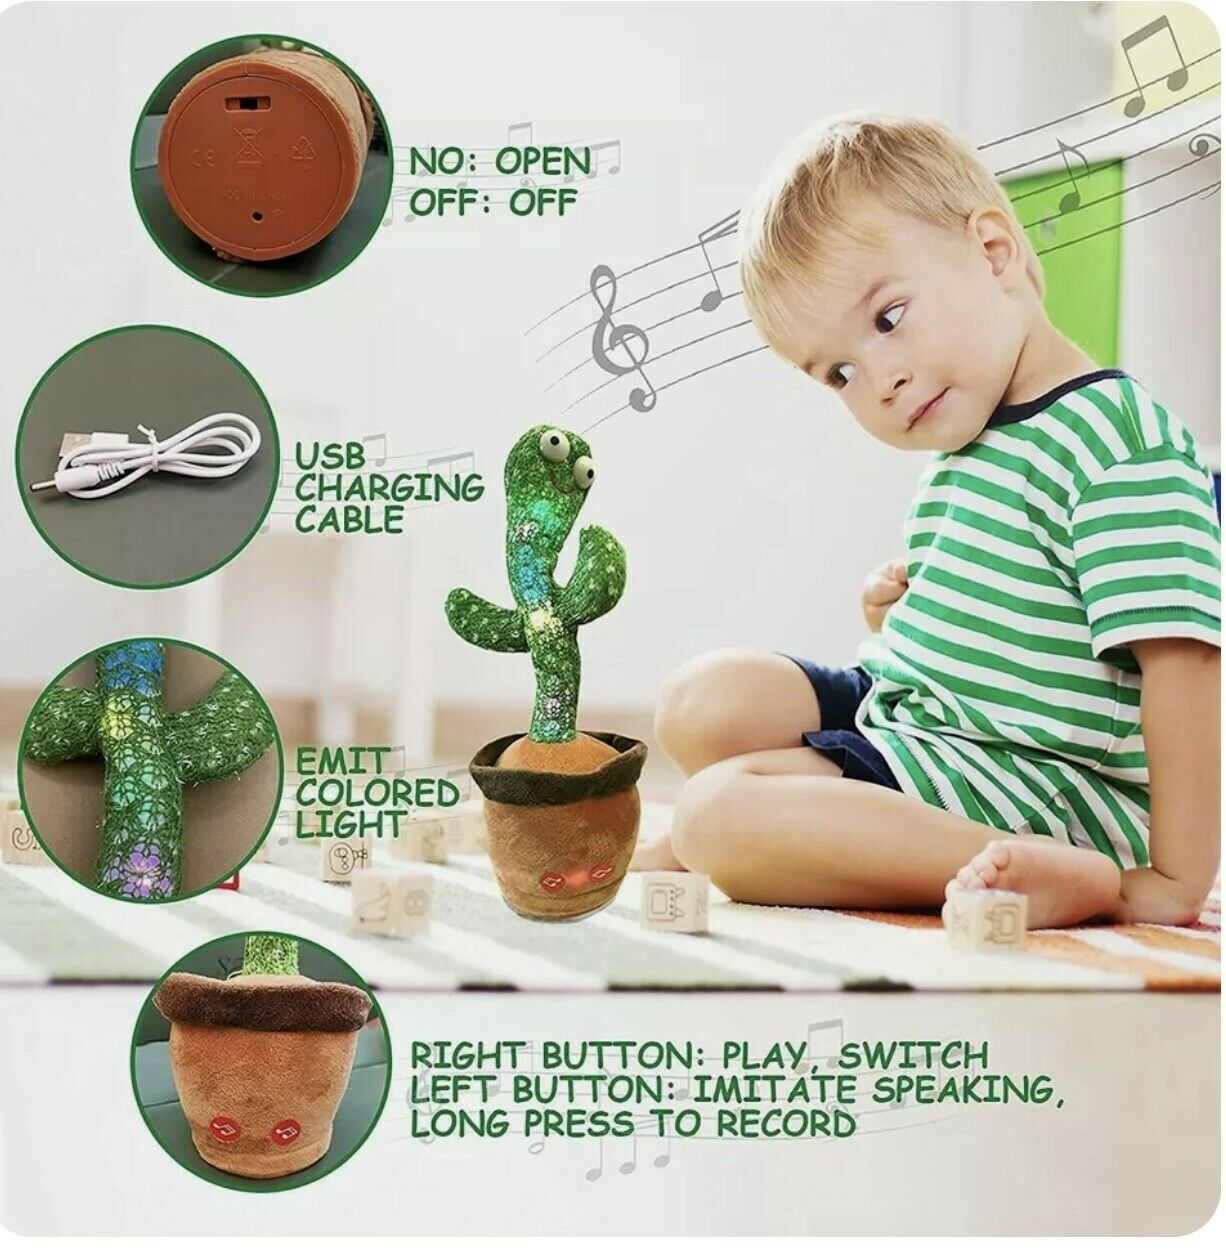 The Dancing Cactus Toy - Cactus Baby BlueTooth & Talk-Back Speak Toy